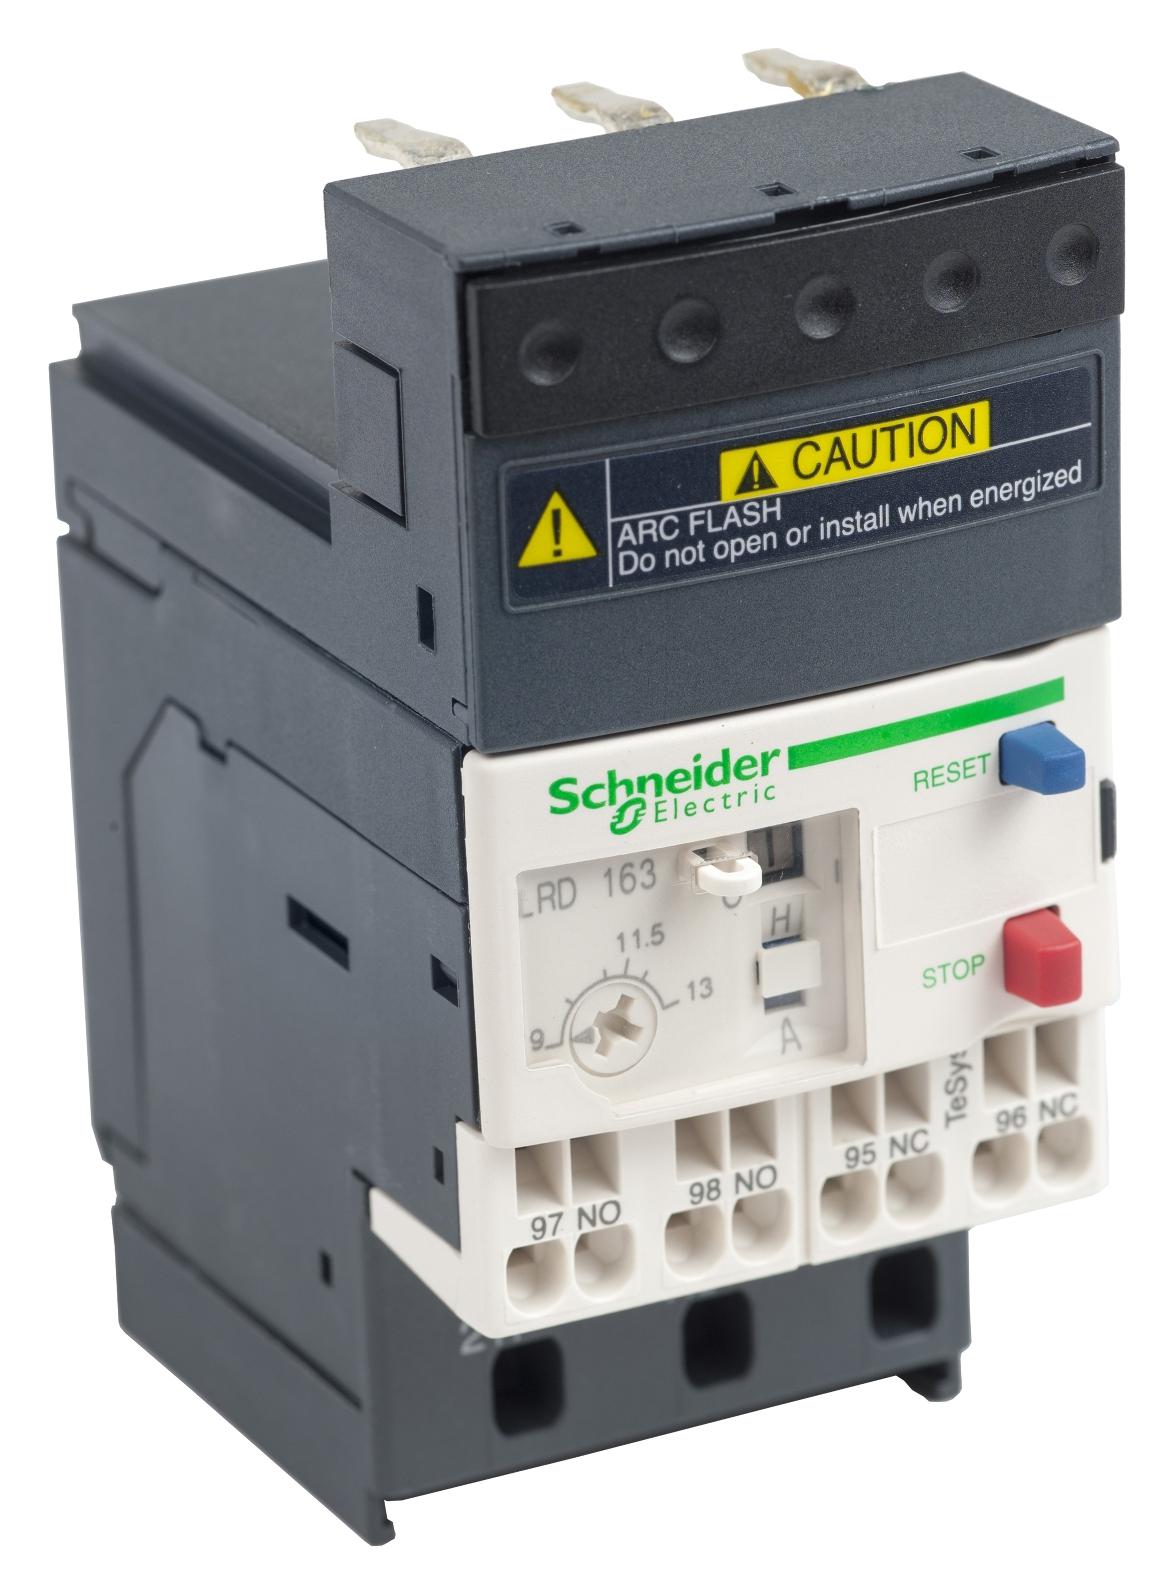 LRD163 THERMAL OVERLOAD RELAY, 9A-13A, 690VAC SCHNEIDER ELECTRIC